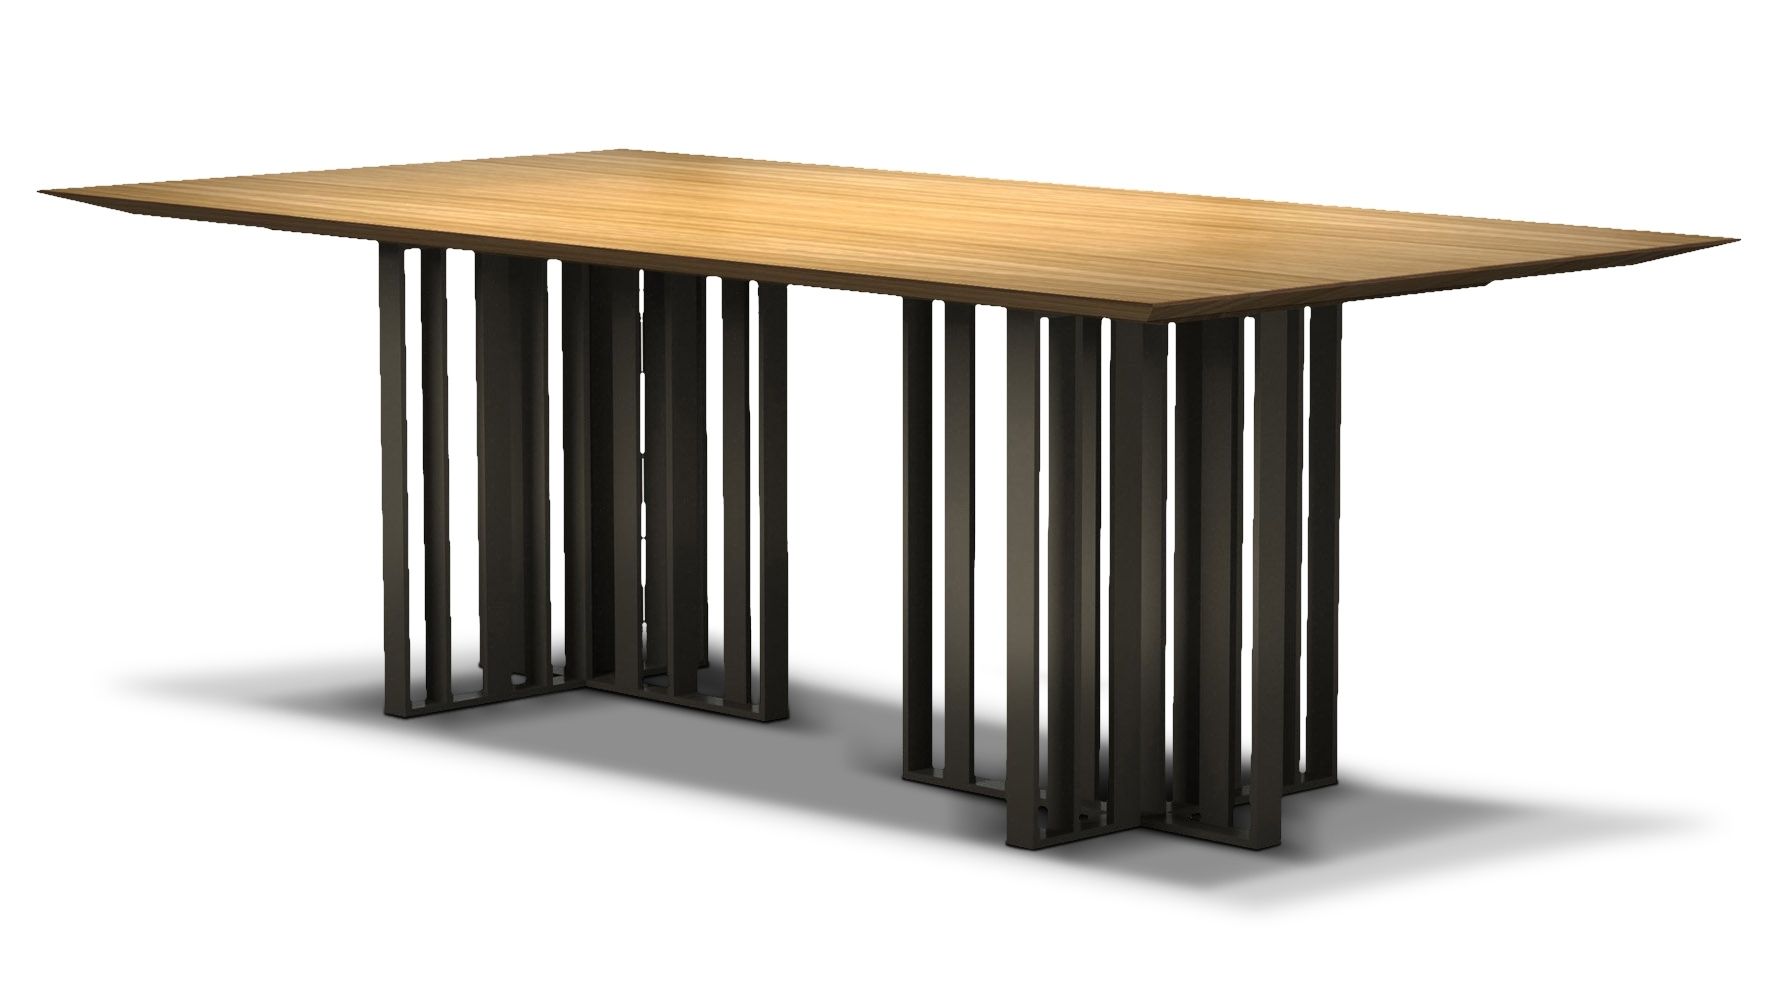 Saida 87 Inch Wood And Aluminum Dining Table, Natural Oak On Bronze Throughout Latest 87 Inch Dining Tables (View 16 of 20)